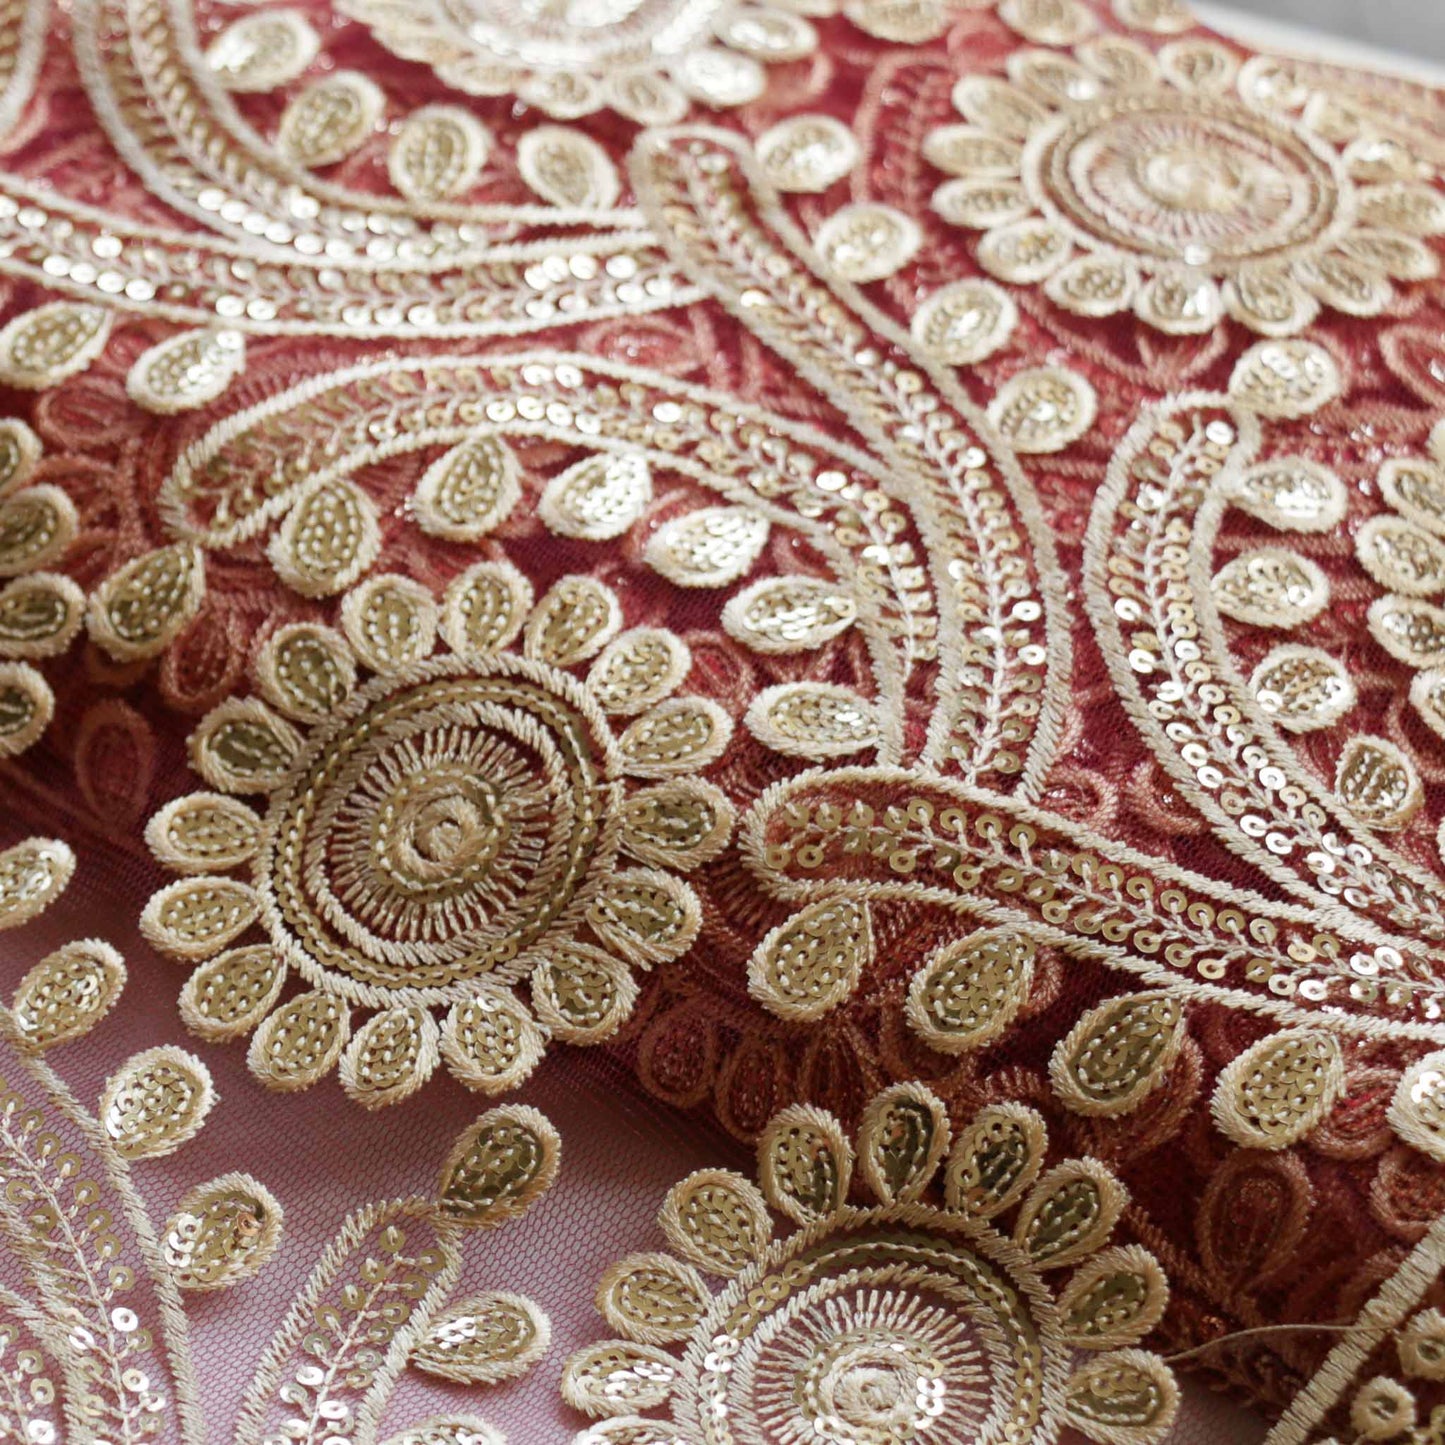 gold embroidery on maroon tulle Indian inspired dressmaking fabric